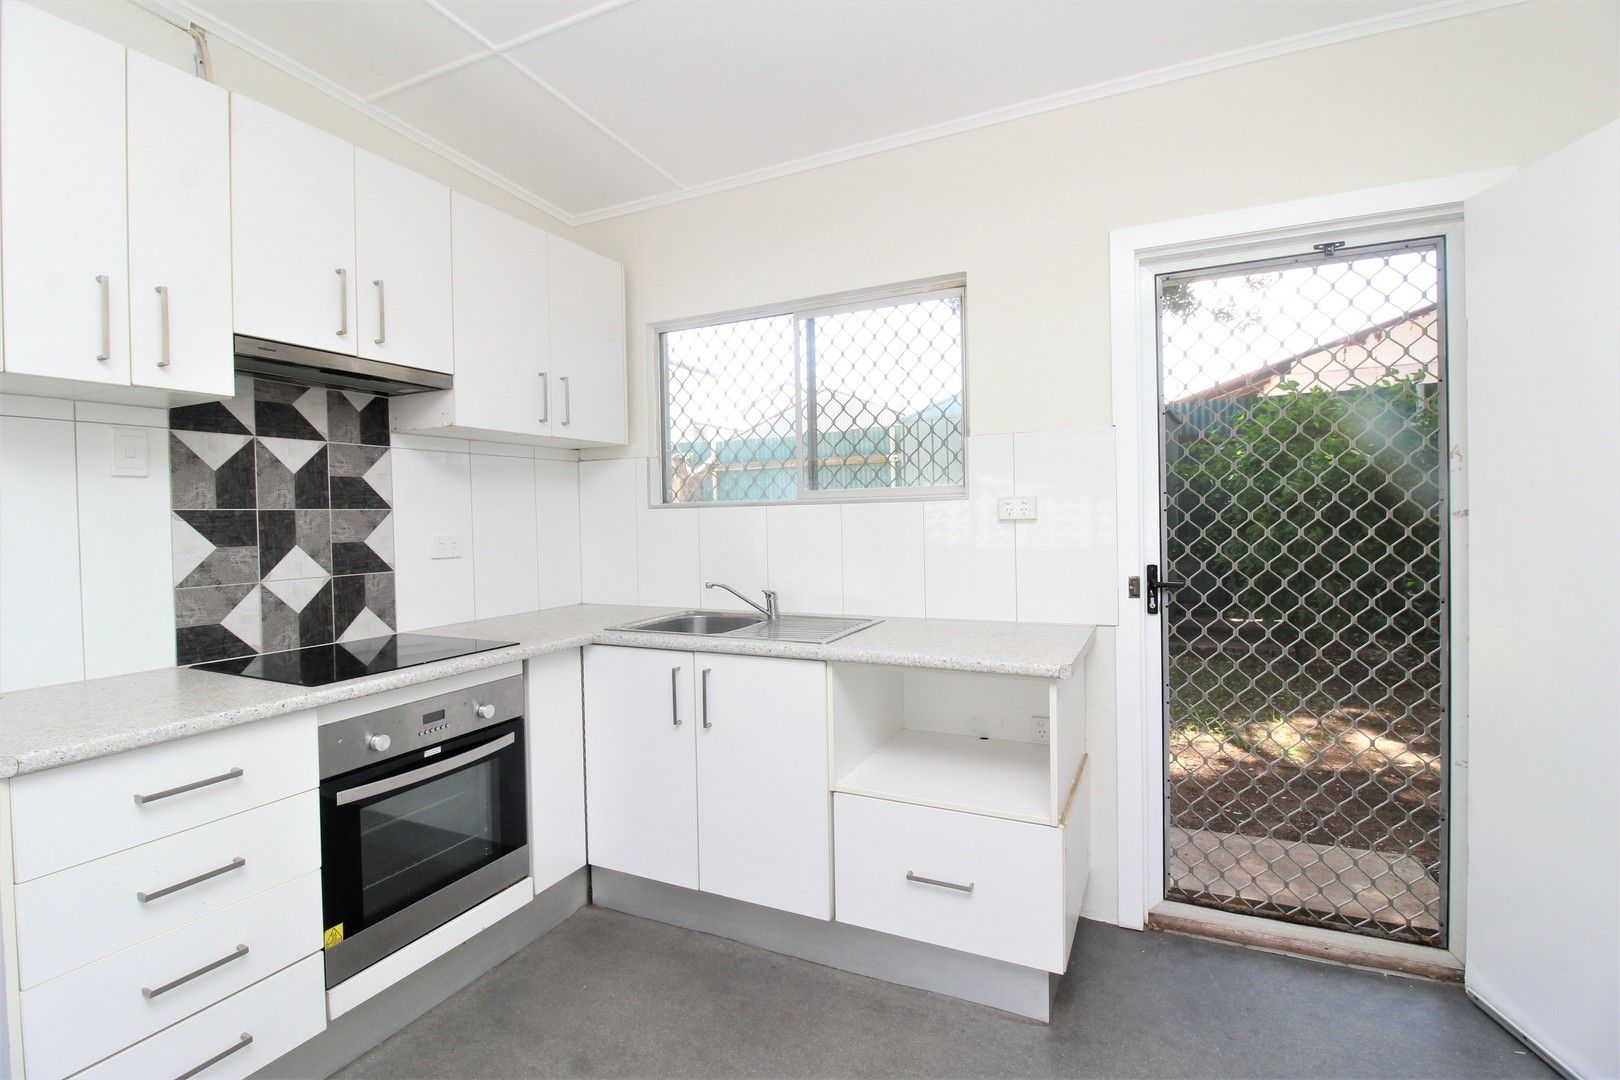 1 bedrooms Apartment / Unit / Flat in 3/18 Flynn St MOUNT ISA QLD, 4825